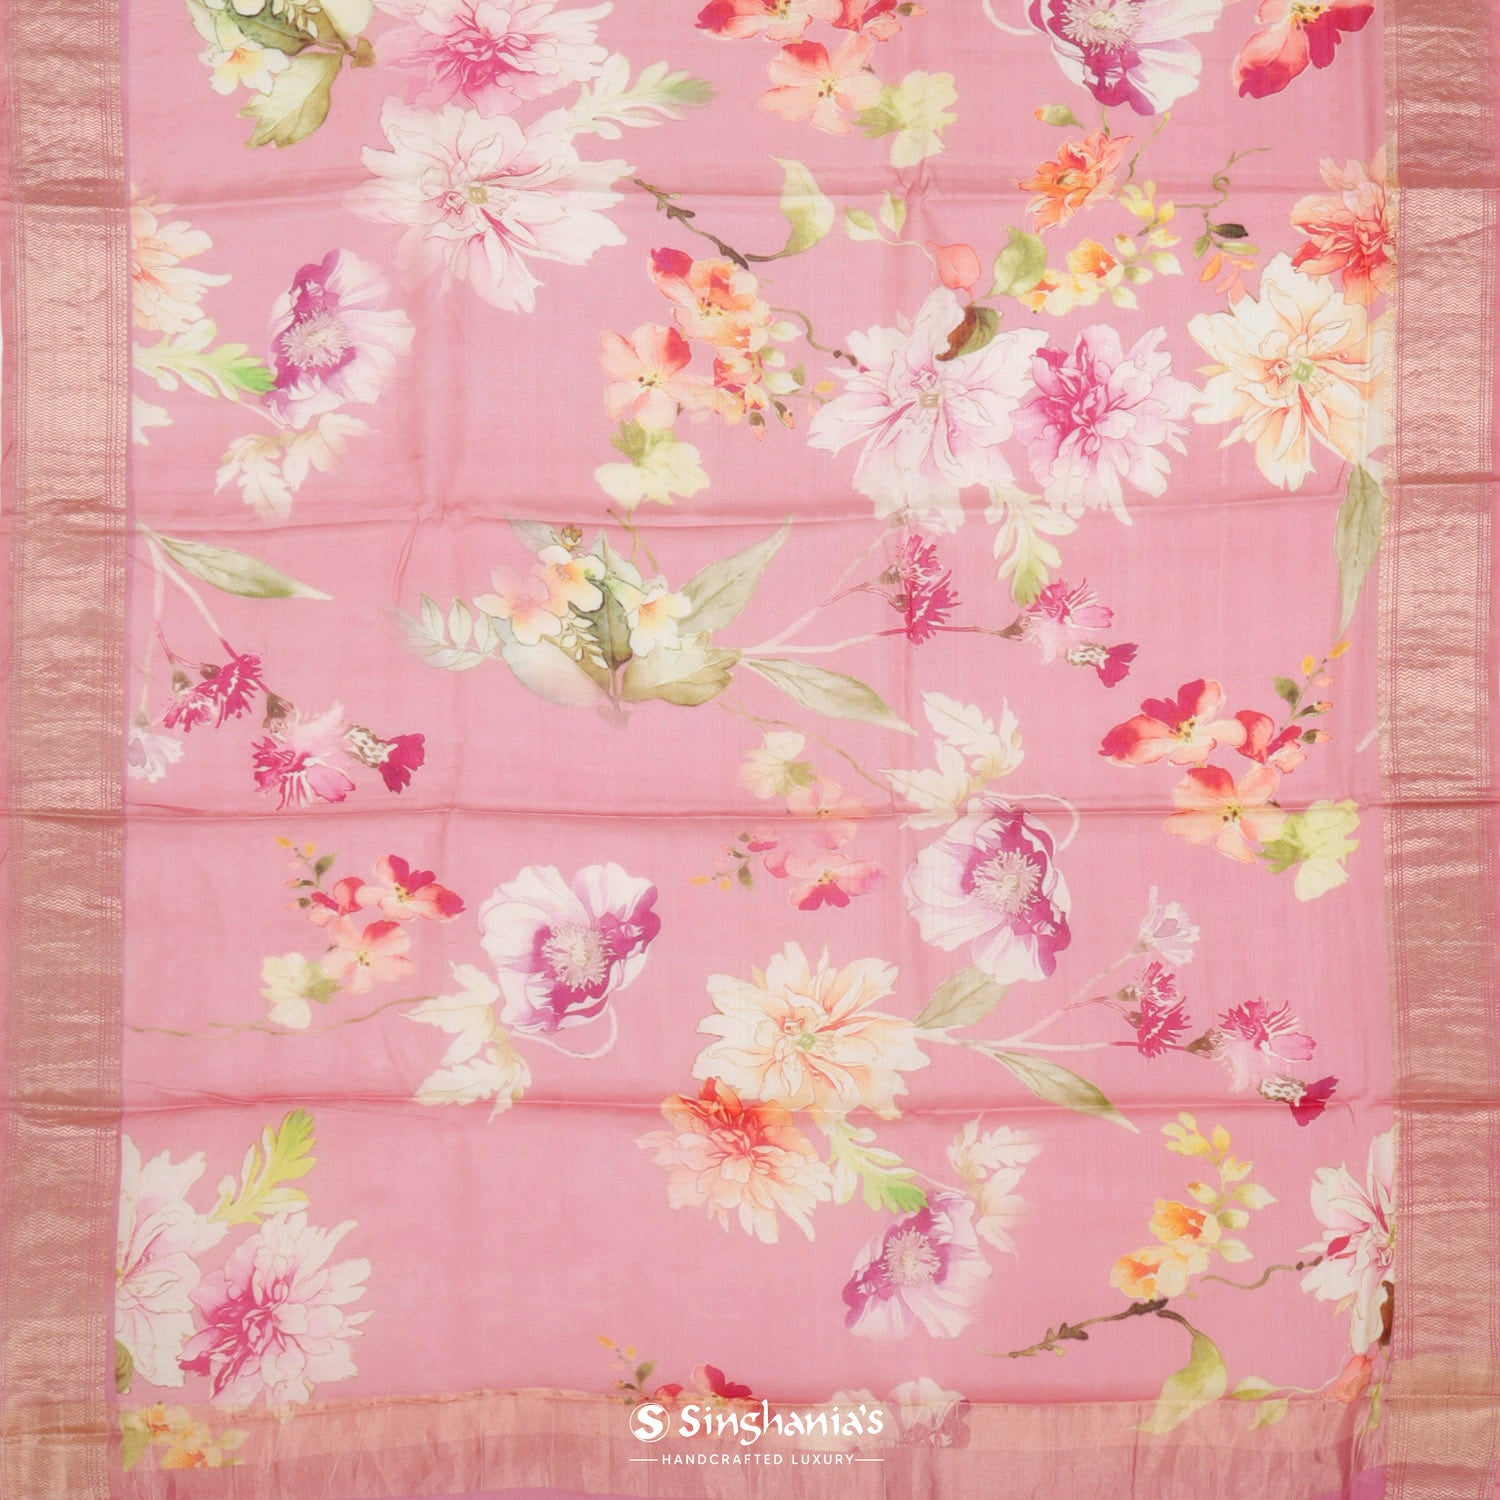 Mauvelous Pink Printed Tussar Silk Saree With Floral Pattern